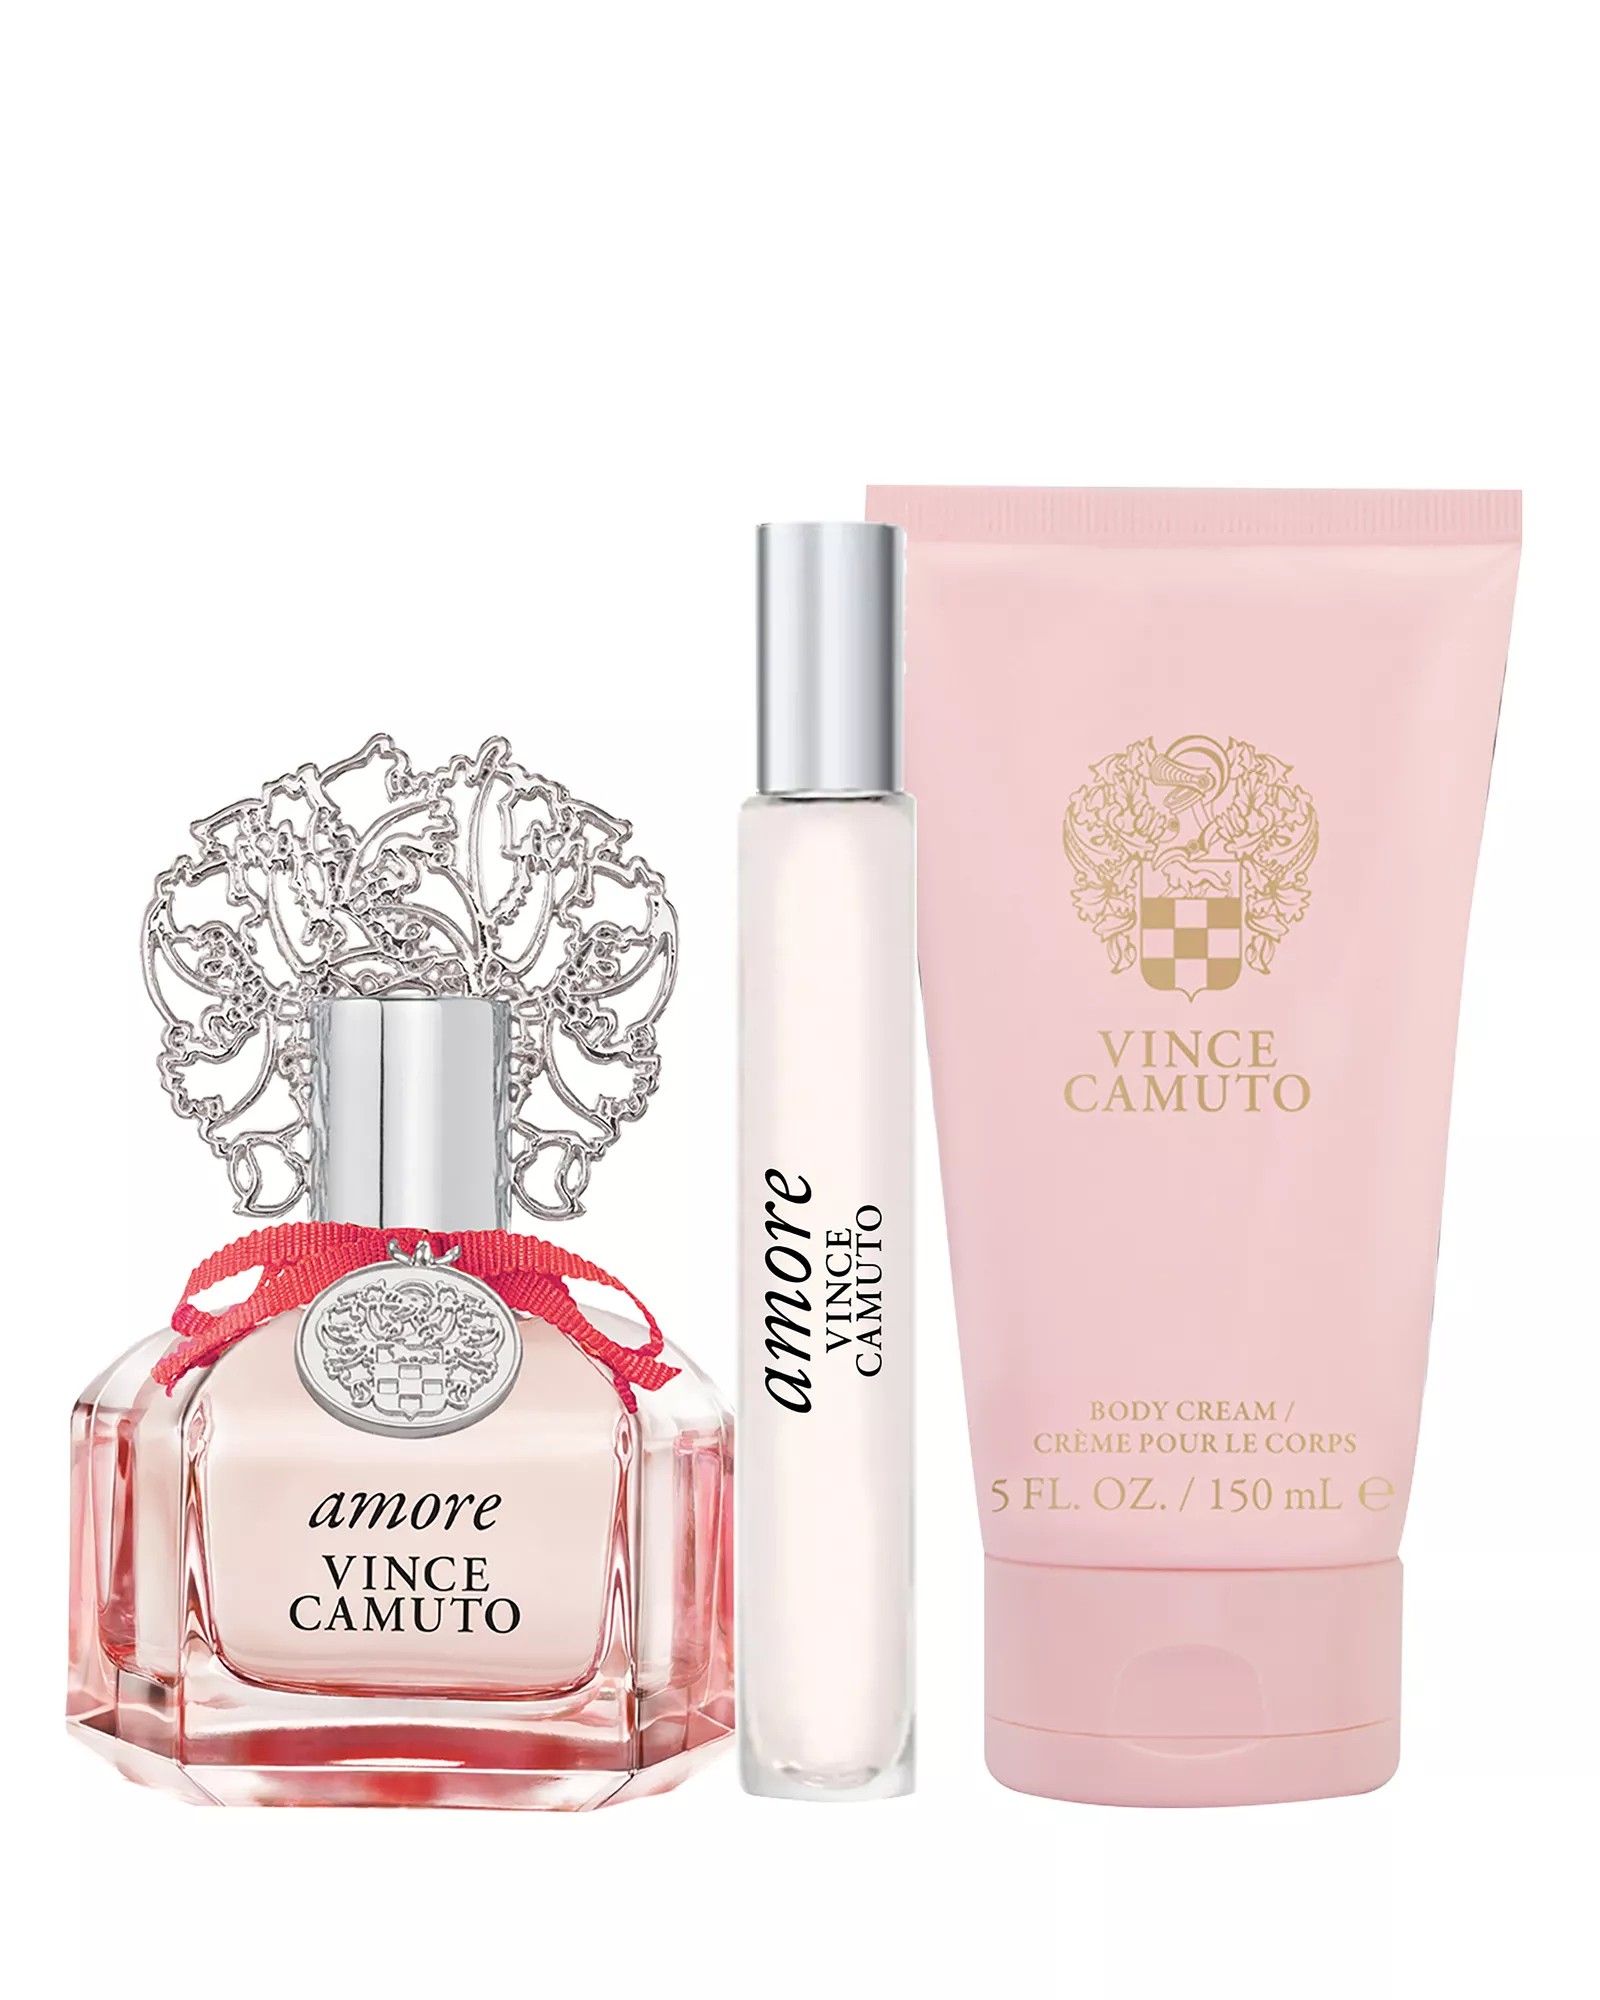 Vince Camuto Amore by Vince Camuto - Buy online